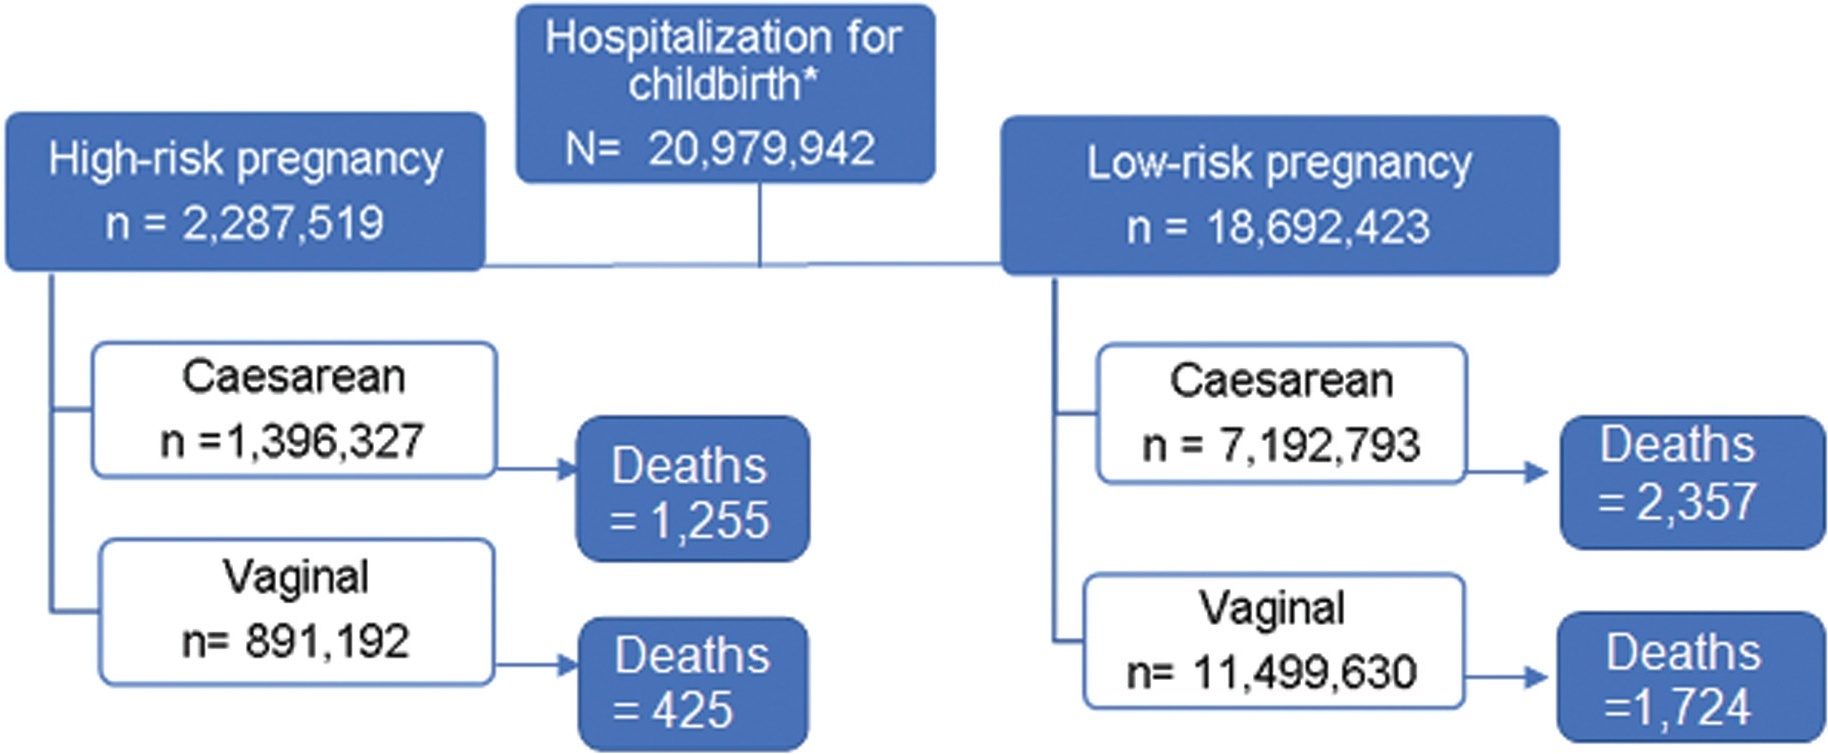 Increment of Maternal Mortality Among Admissions for Childbirth in Low-risk Pregnant Women in Brazil: Effect of COVID-19 Pandemic?